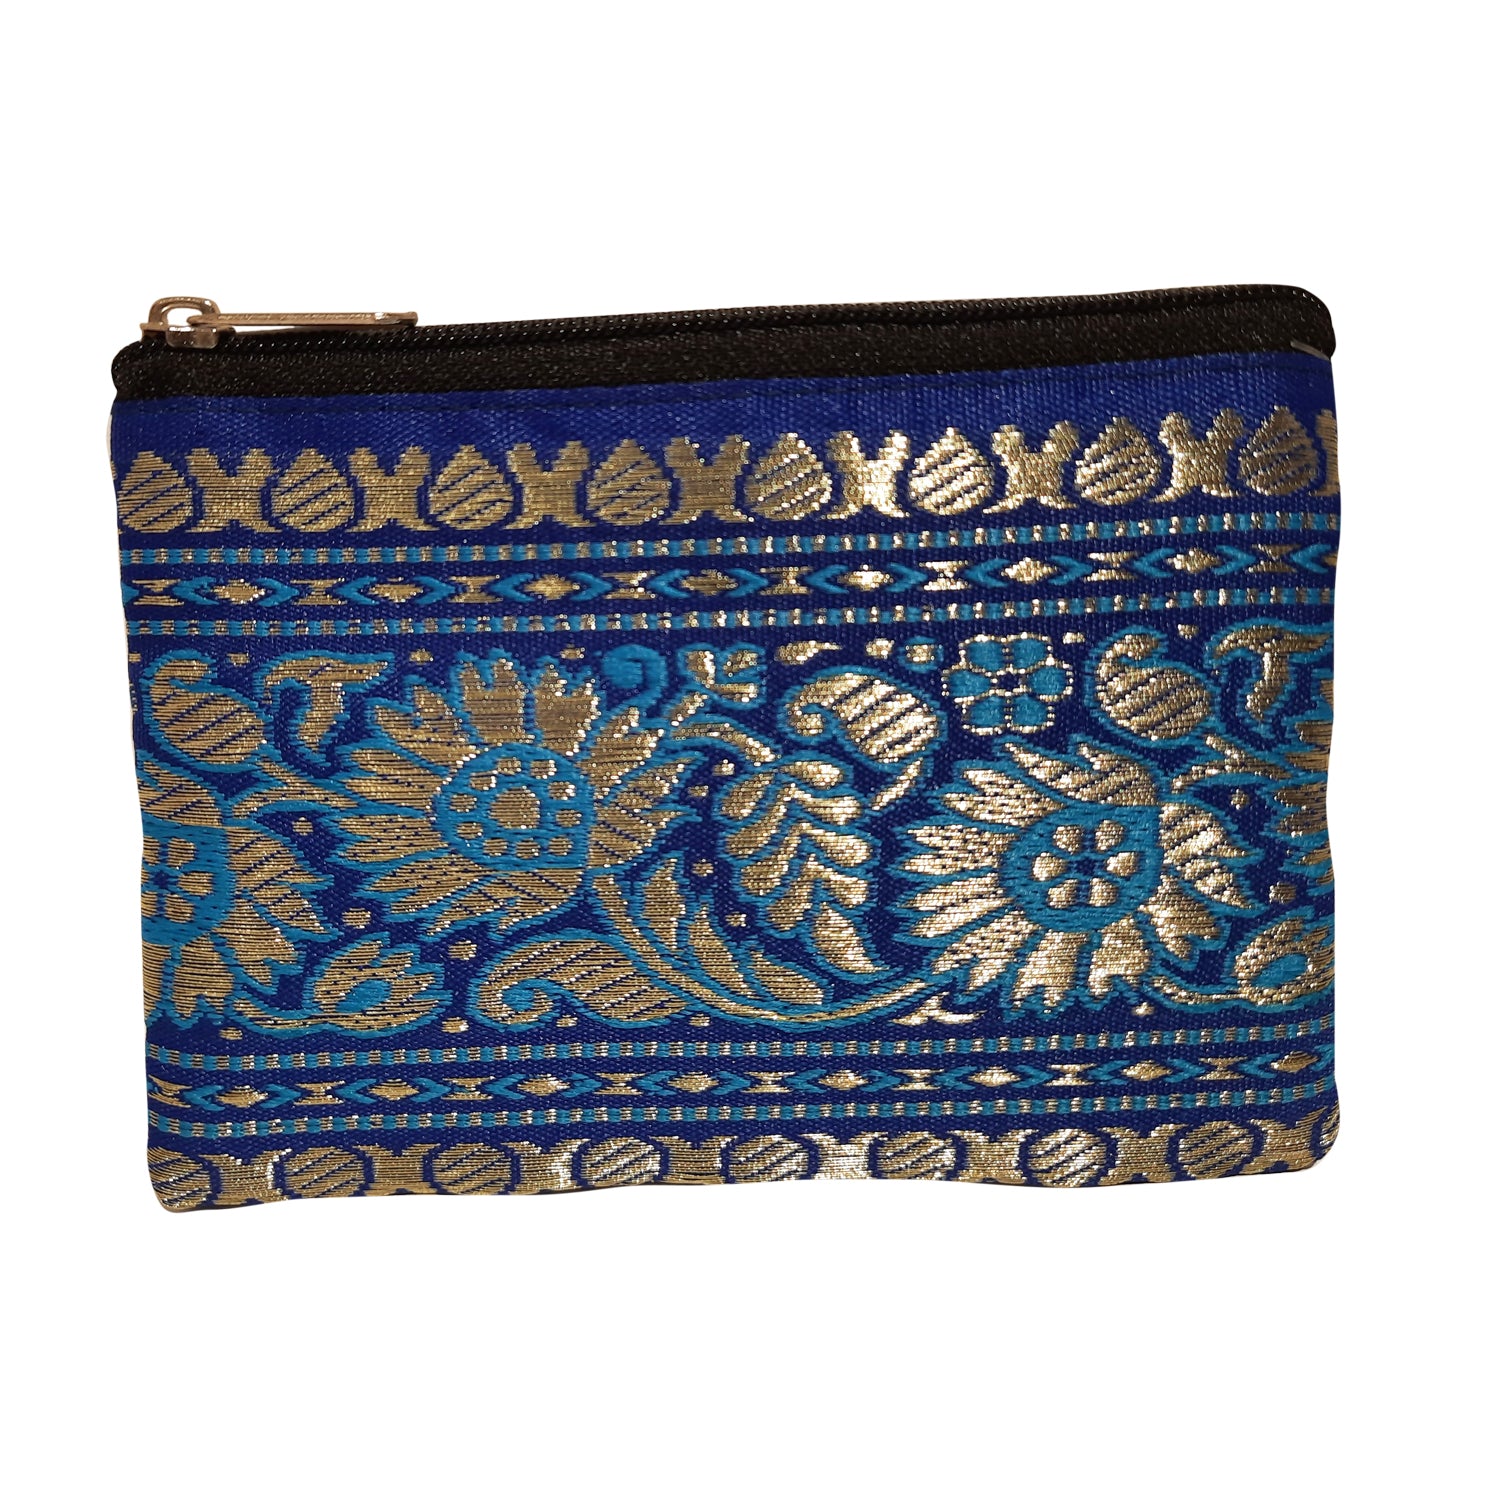 The Bombay Store Coin Pouch with Brocade Border